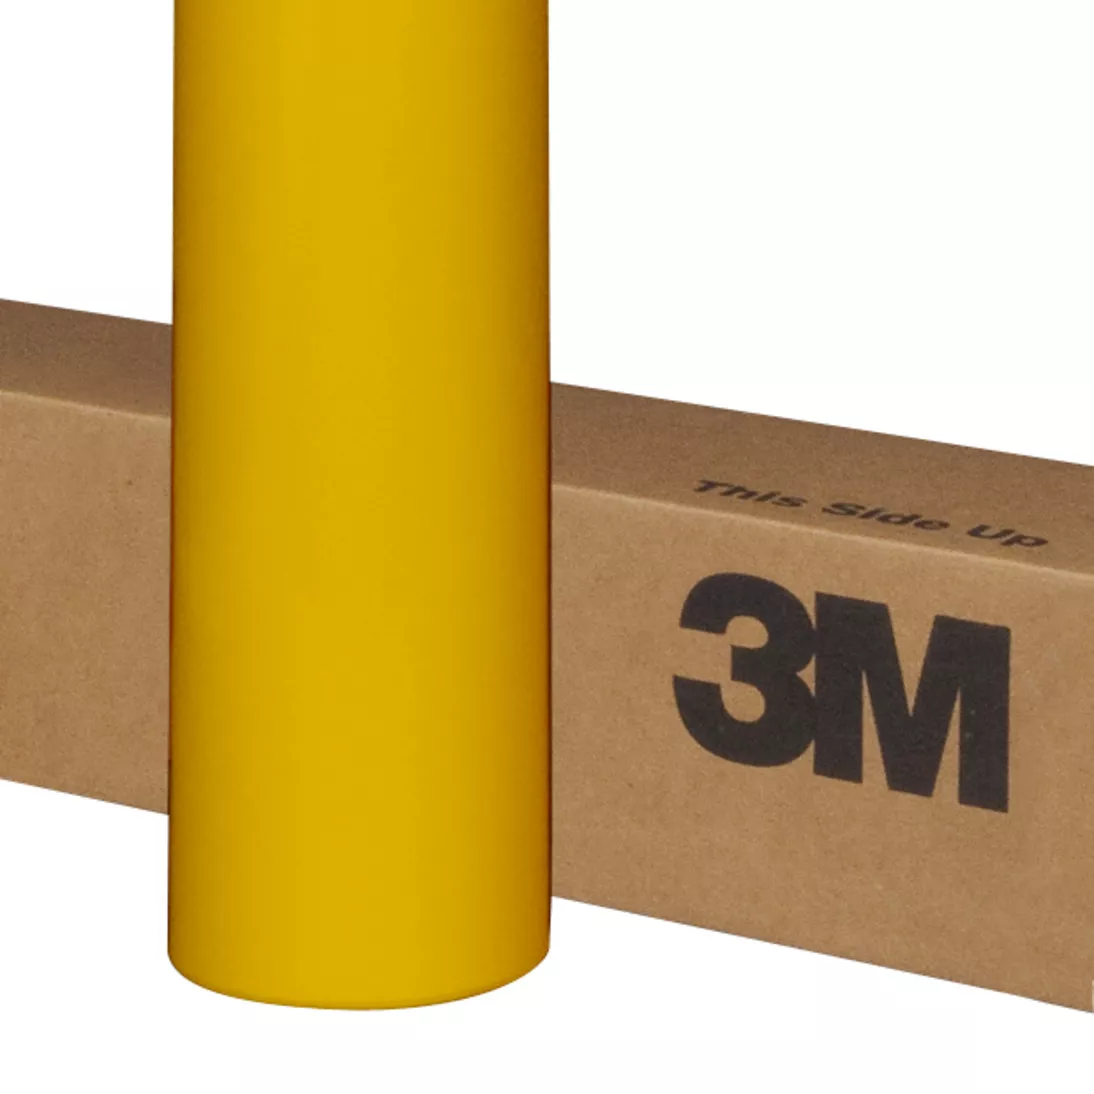 3M™ Scotchlite™ Reflective Graphic Film, 5100R-71, Yellow, 48 in x 50
yd, 1 Roll/Case